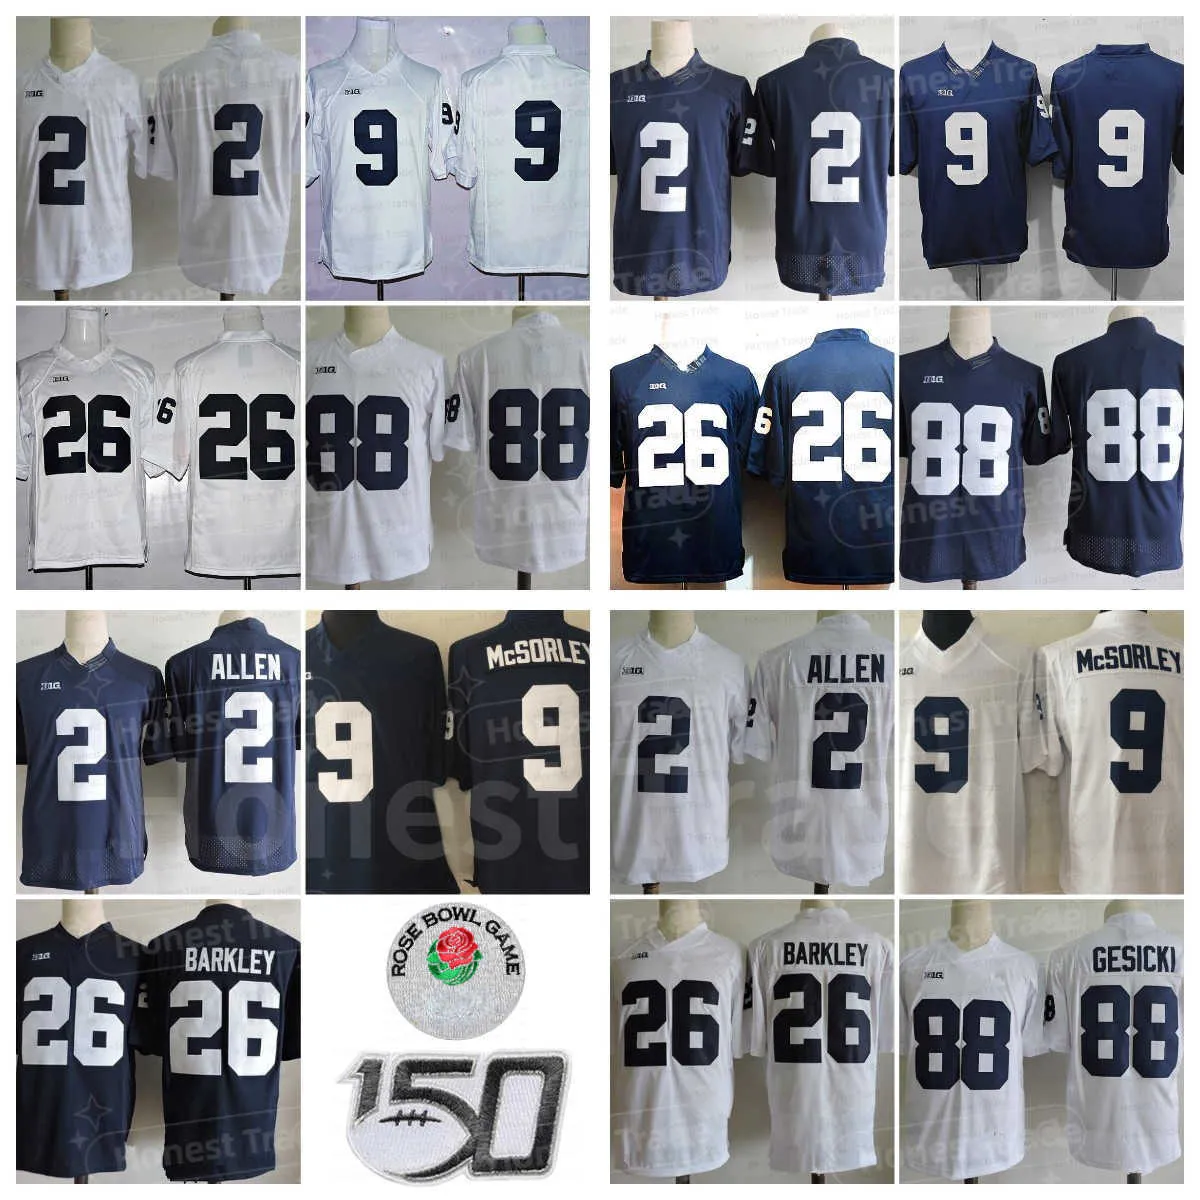 NCAA Penn State College #26 Saquon 9 Trace McSorley 88 Mike Gesicki 2 Marcus Allen Paterno Stitched Jerseys White Navy 150th Men Uniforms